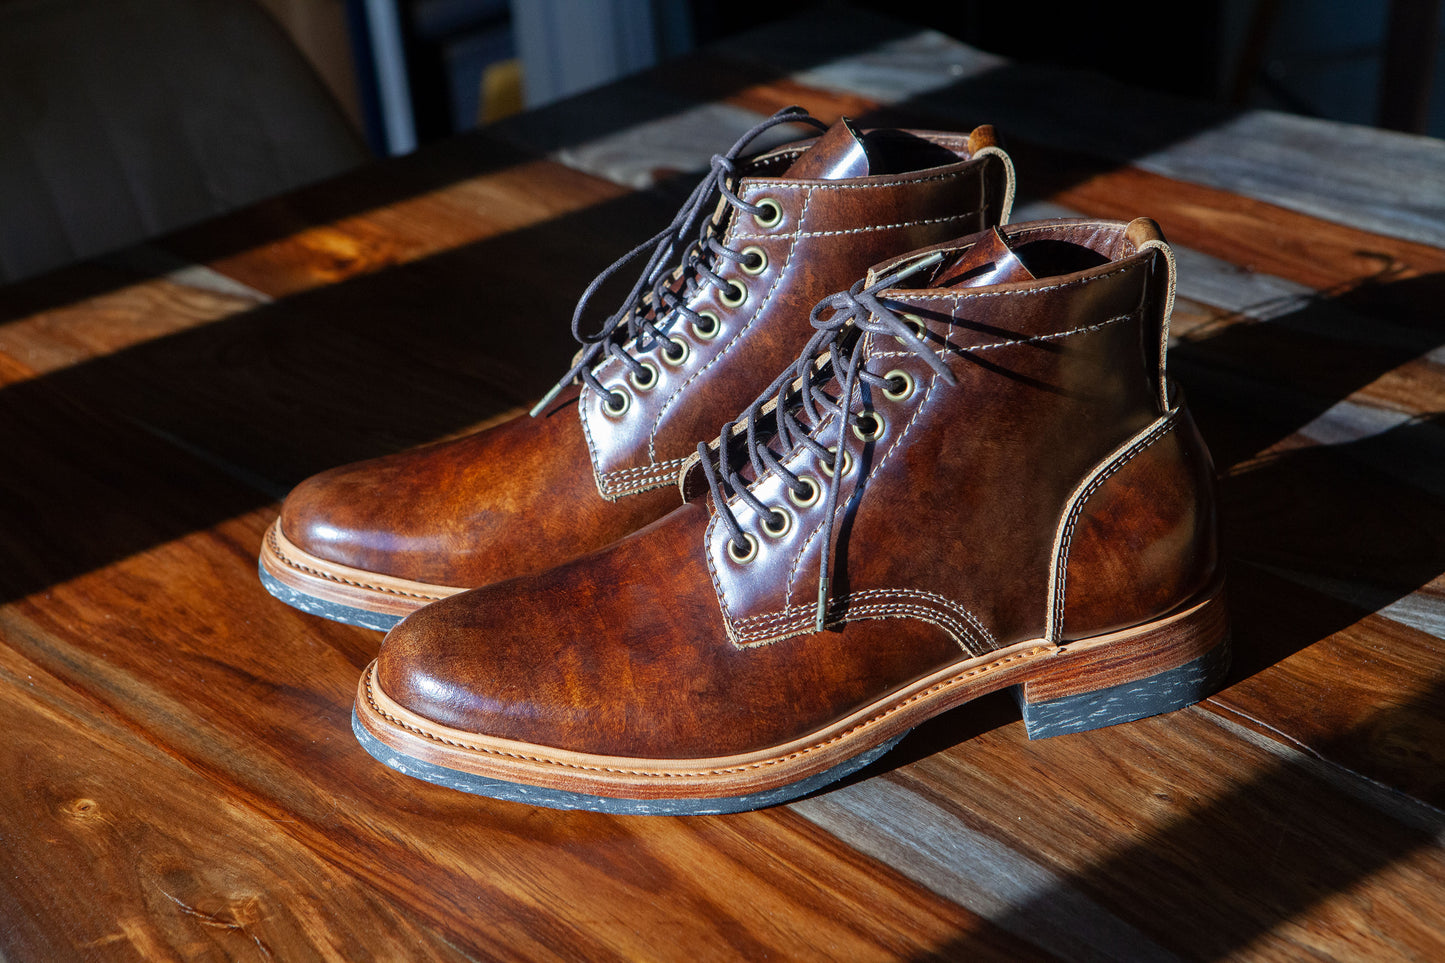 Pigeon Tree X Santalum Collab No. 4.5 - The Hand Marbled Brown Vegetable Tanned Boot